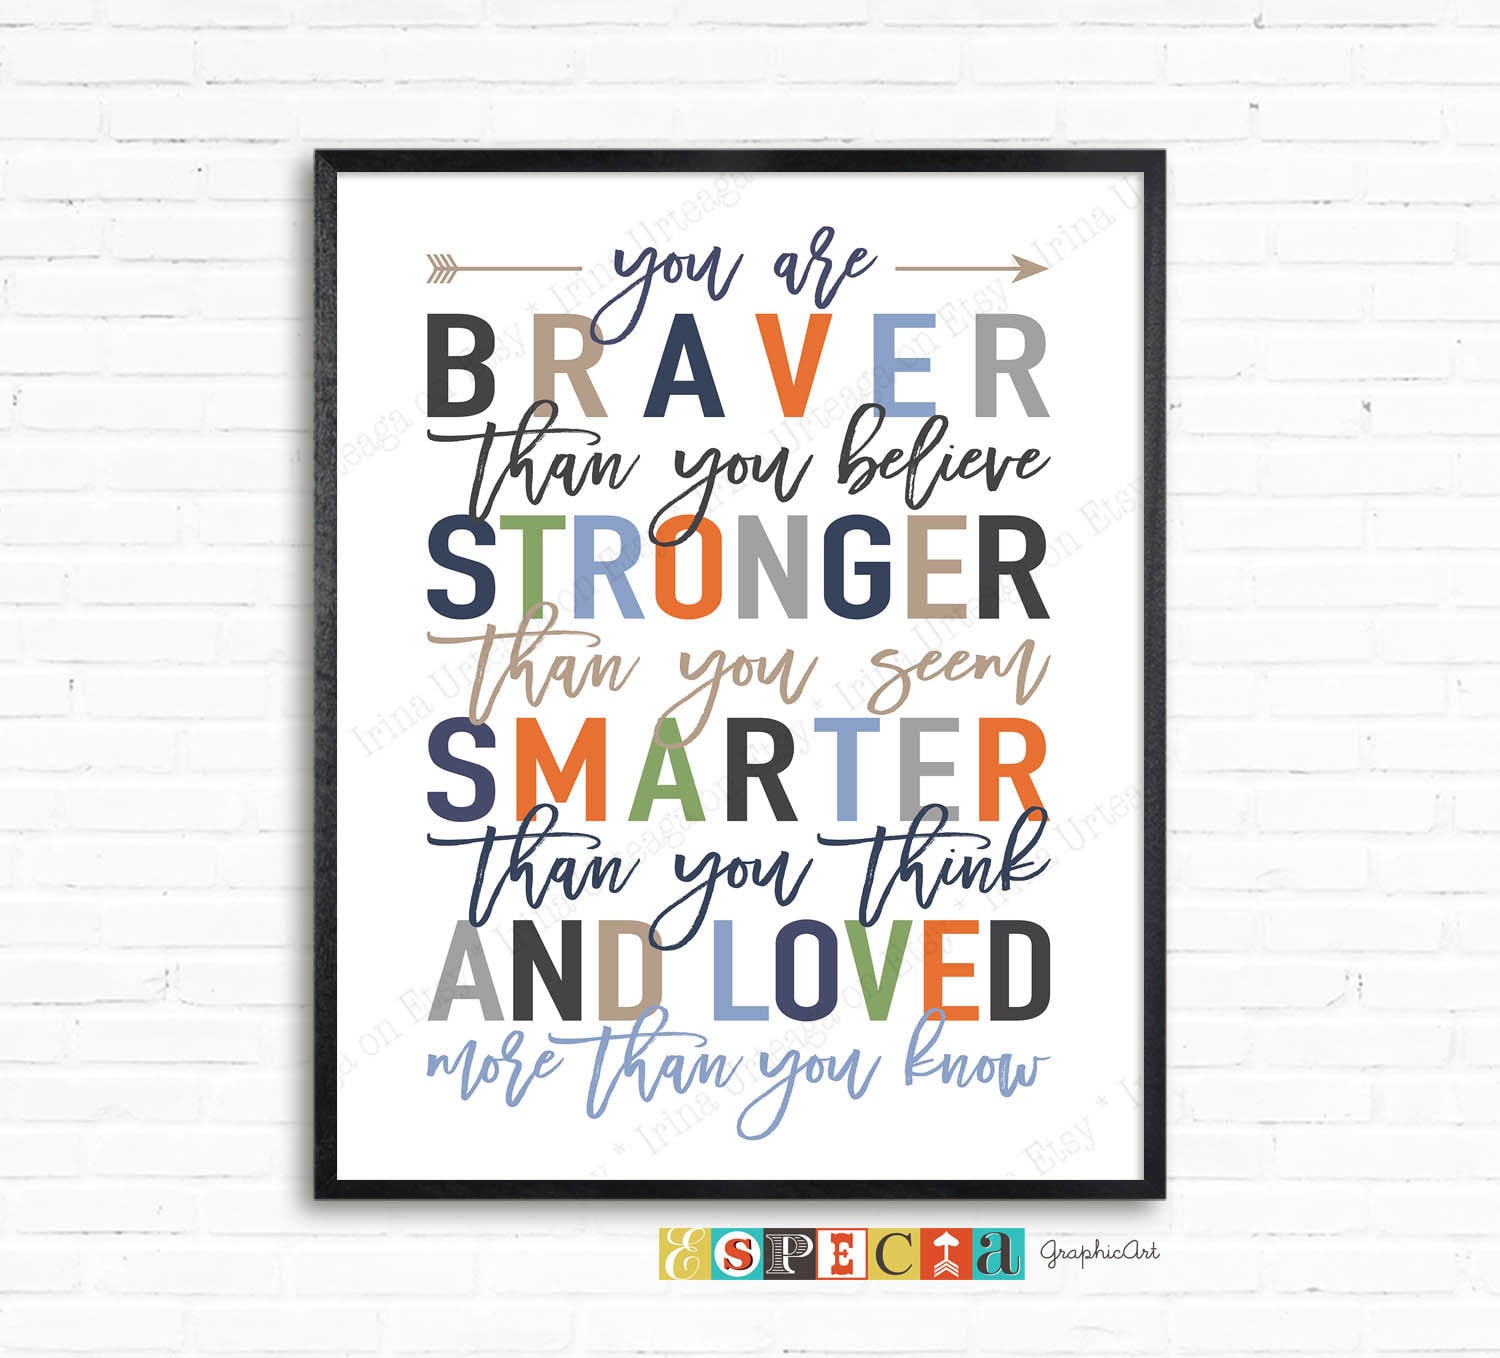 Printable Wall Decor Loved More Than You Know Kids Room INSTANT DOWNLOAD You Are Braver Custom Colors Girly Colors Stronger